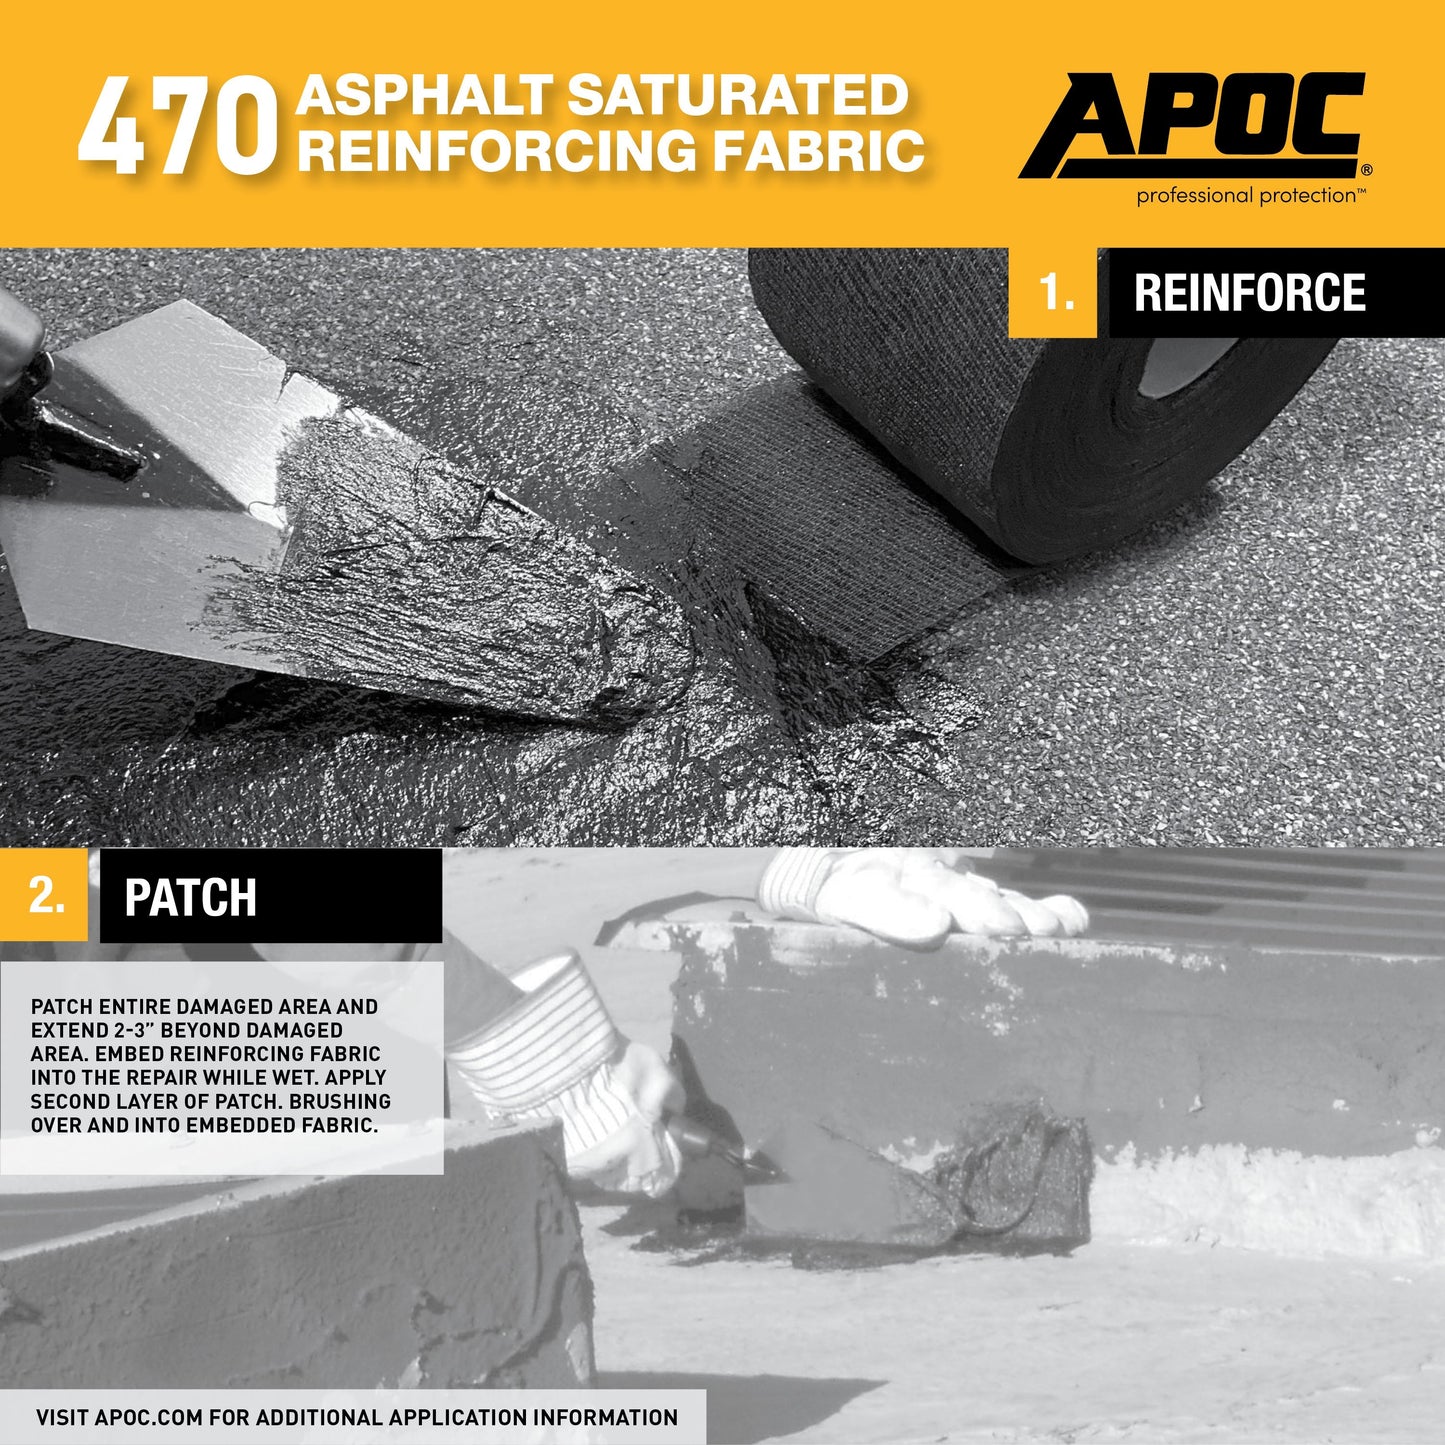 APOC<sup>®</sup> 470<br>Asphalt Saturated Reinforcing Fabric